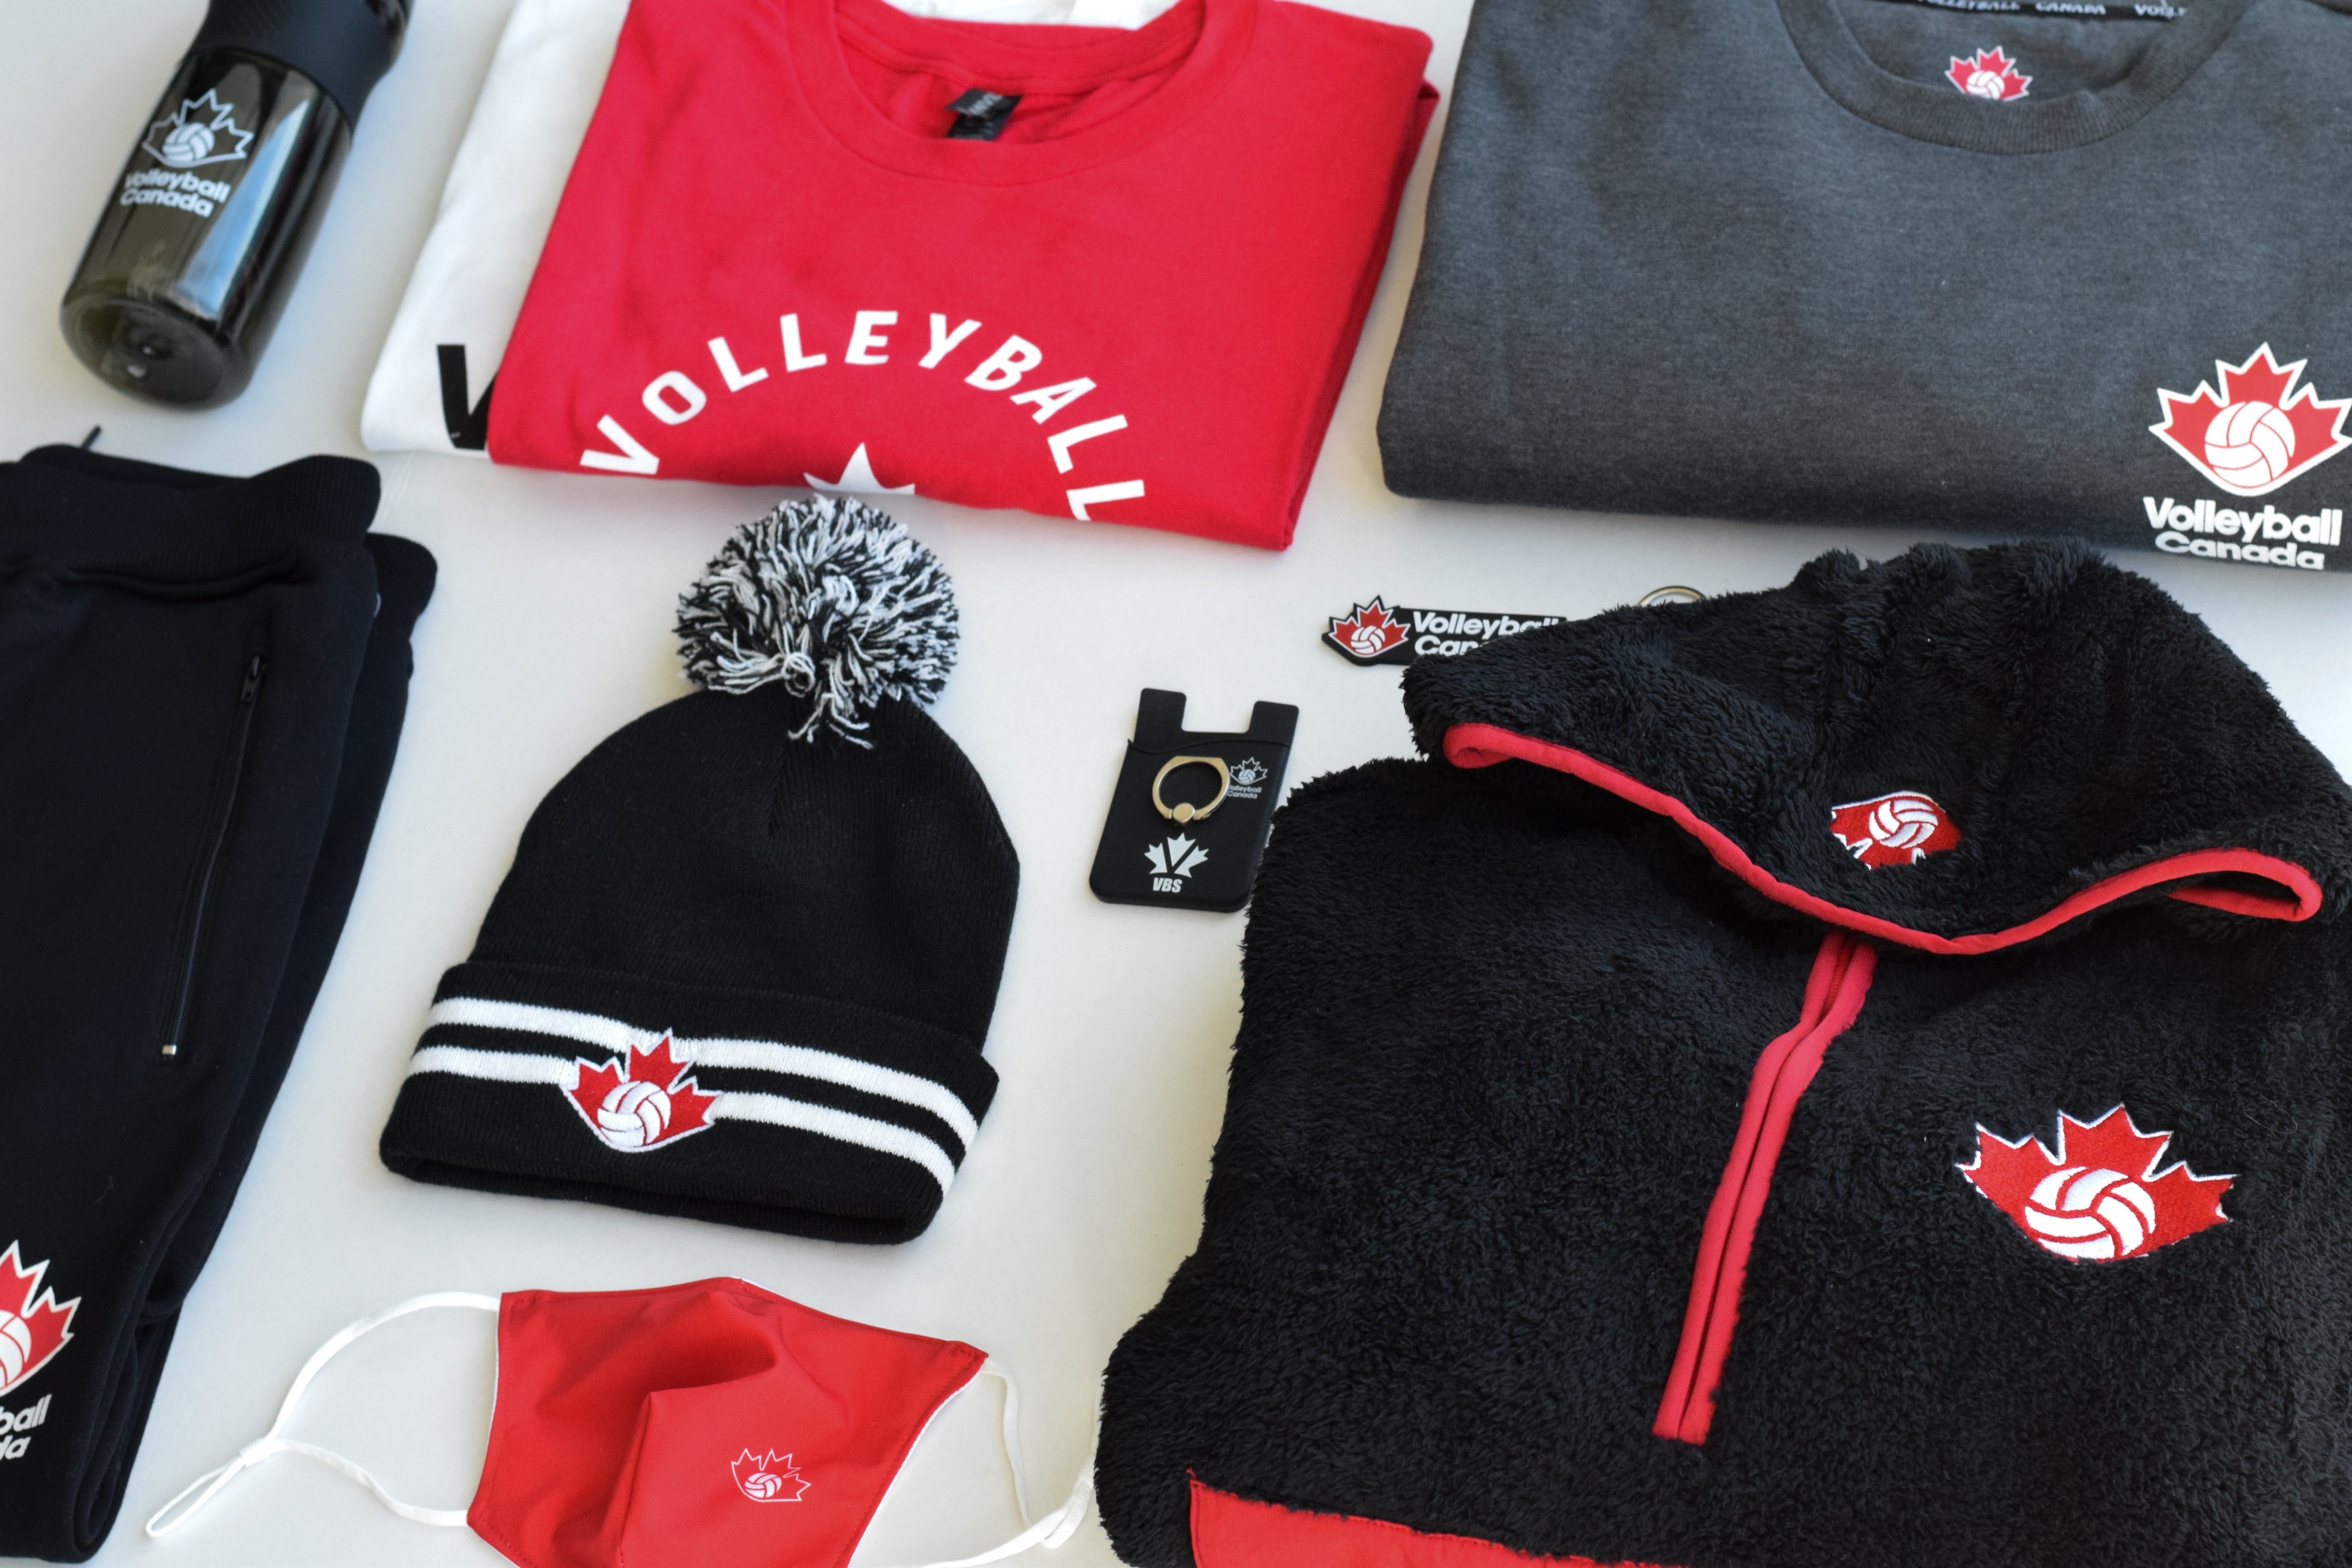 Give the gift of Volleyball Canada fan gear with four gift boxes to choose  from